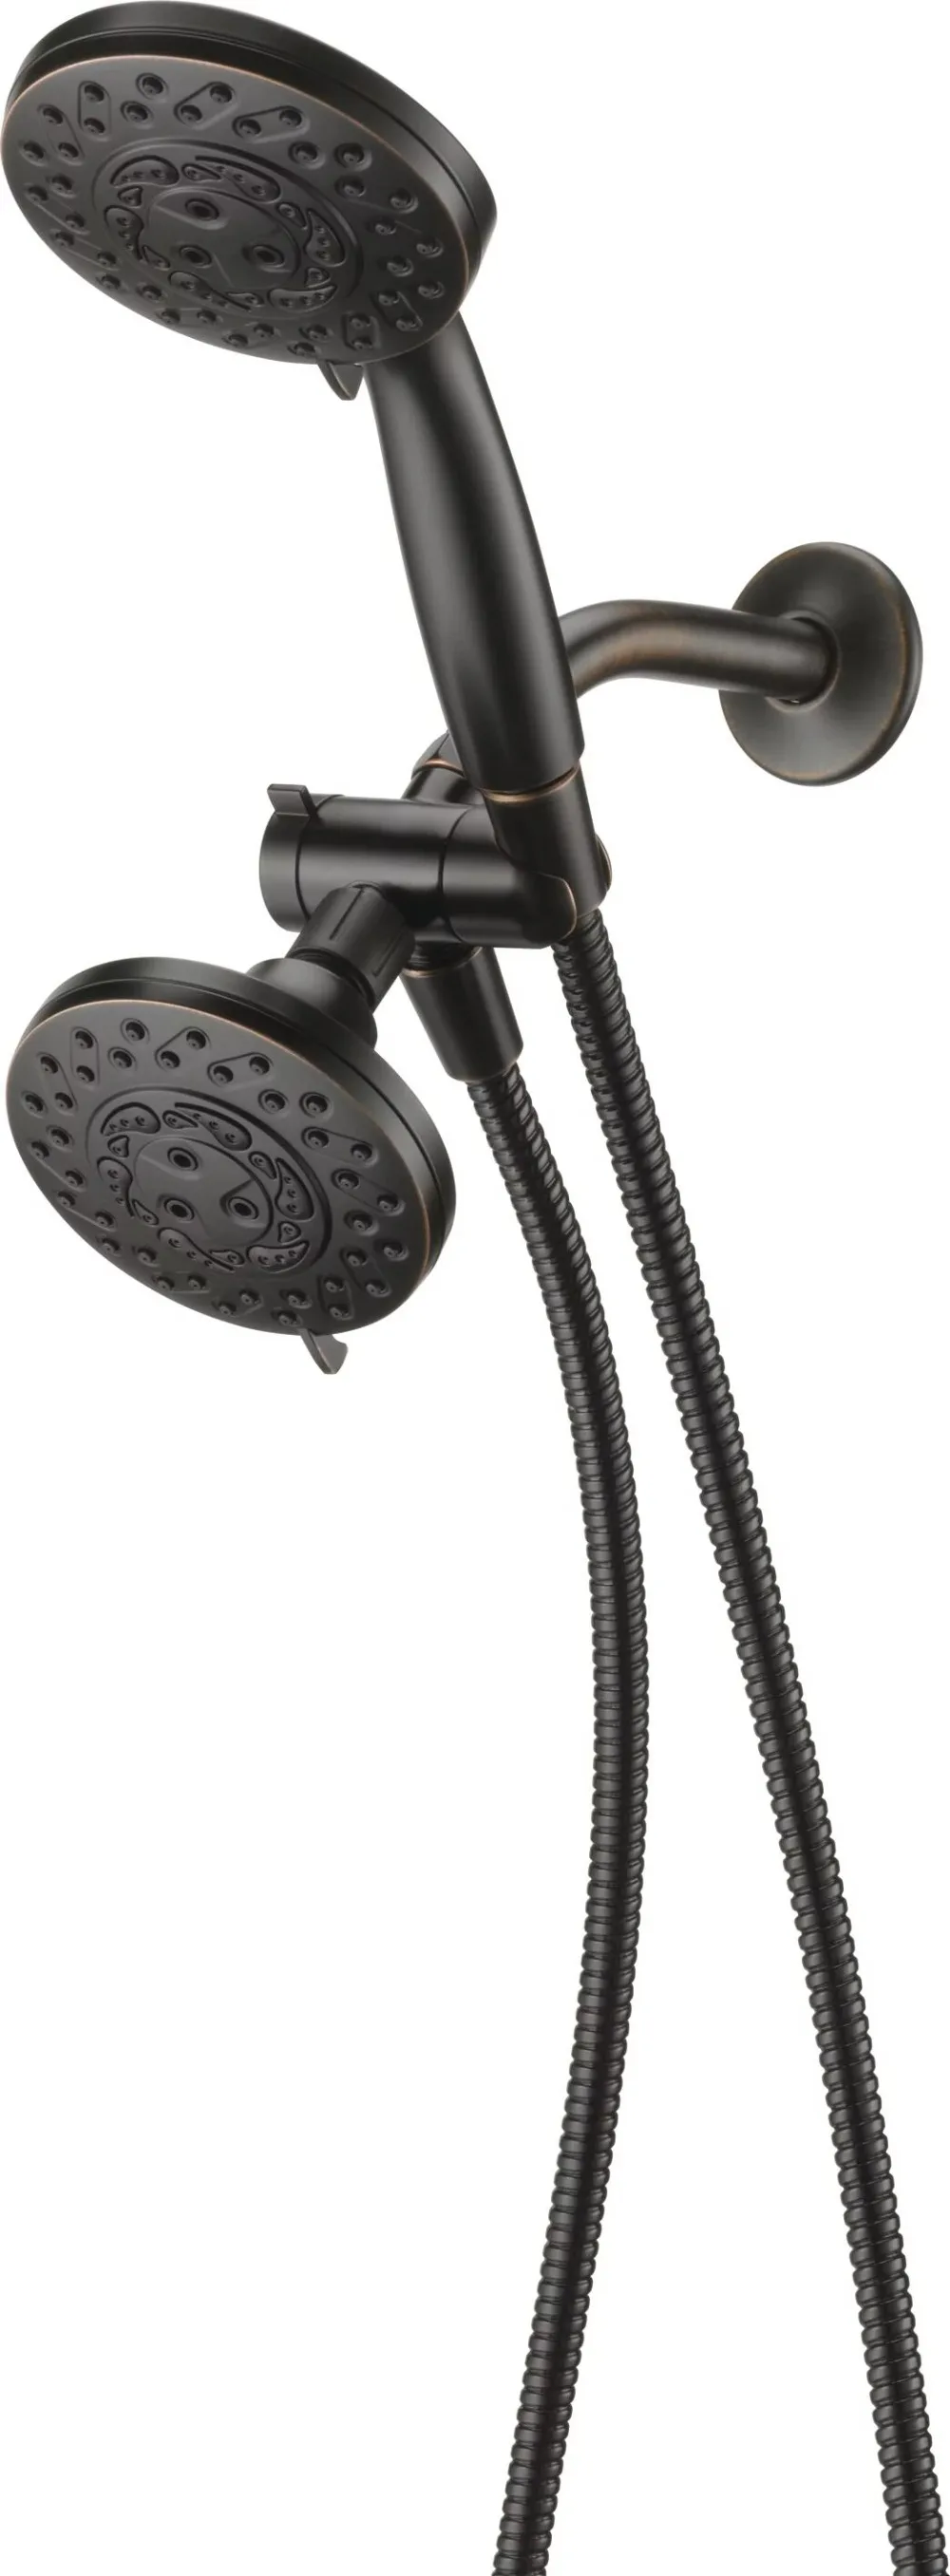 

Oil Cloth Bronze 6 Sets of Combined Showers Using Both Shower Heads and Handheld Showers Rain Shower Head